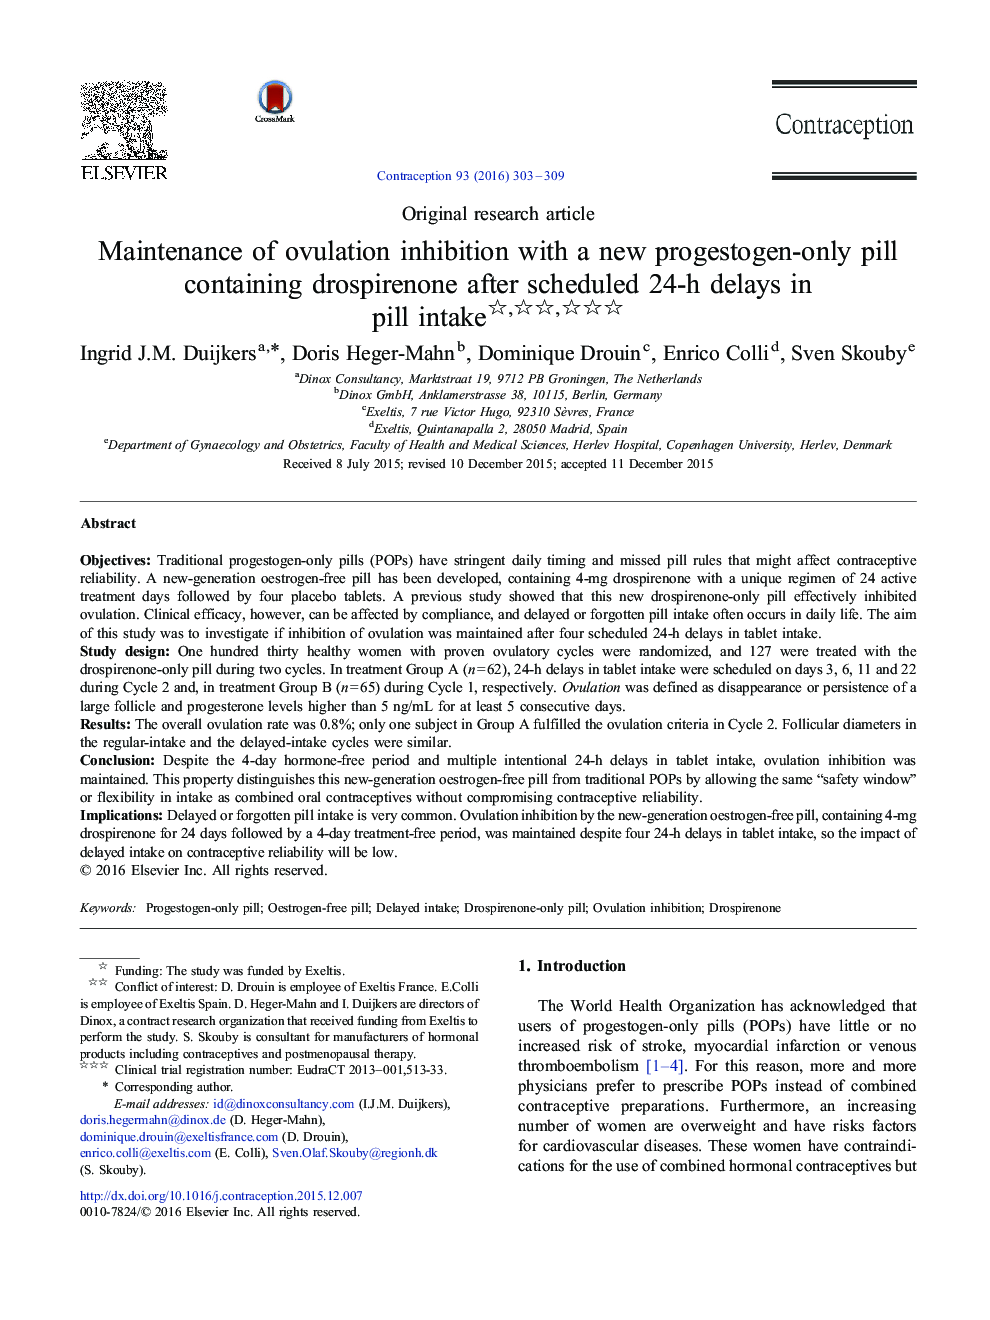 Original research articleMaintenance of ovulation inhibition with a new progestogen-only pill containing drospirenone after scheduled 24-h delays in pill intake